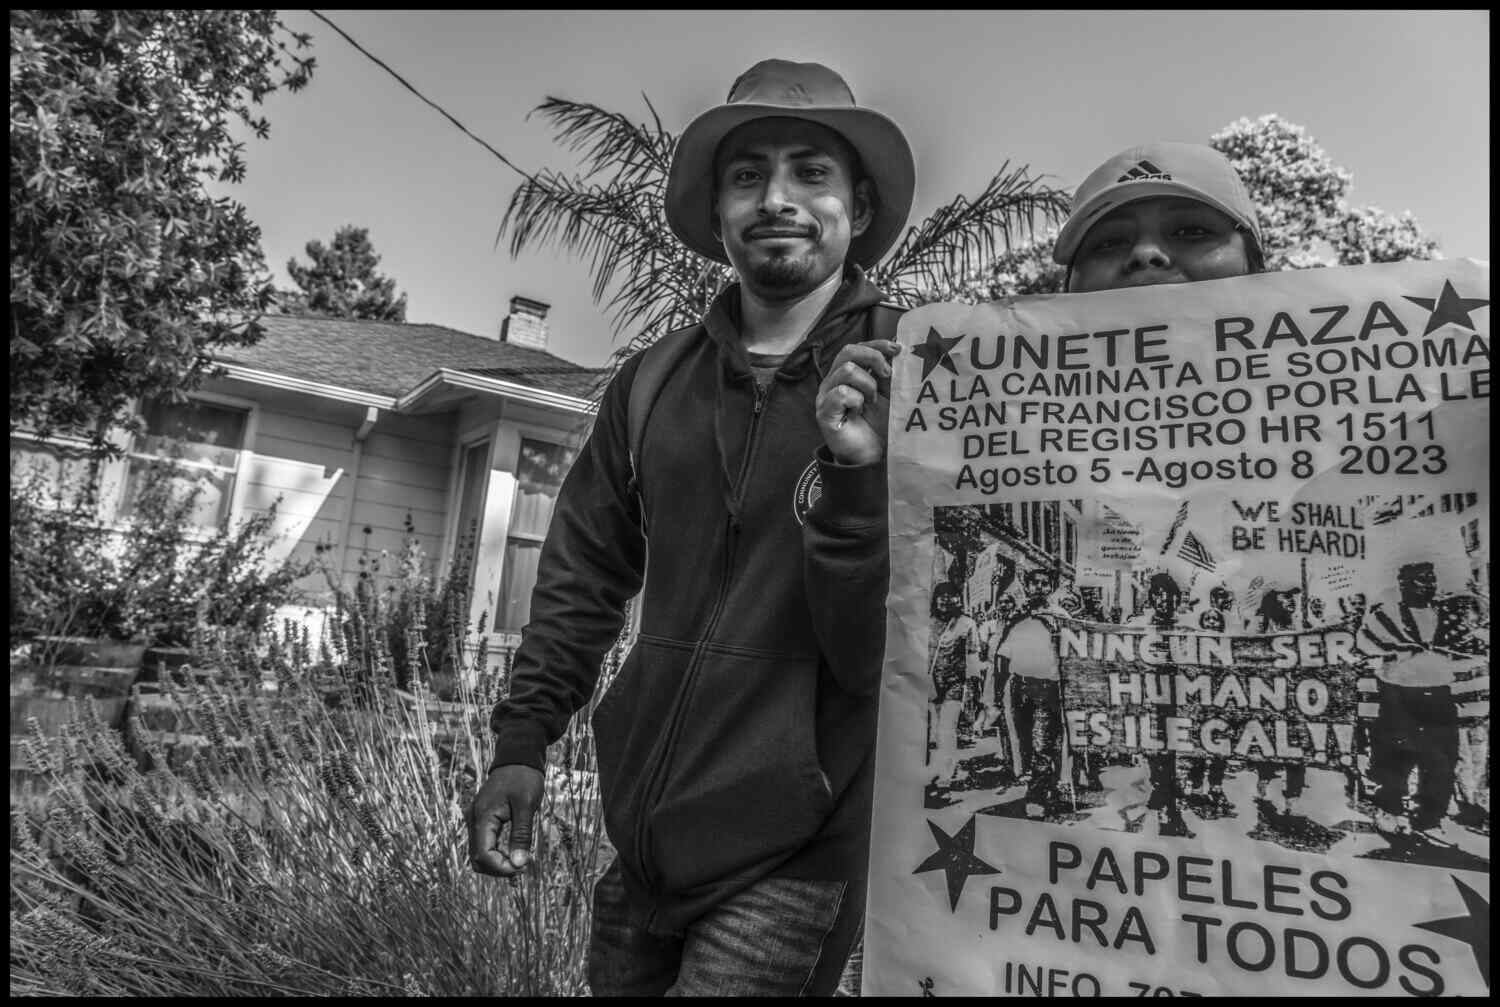 Farmworkers march in support of the Registry Bill in California